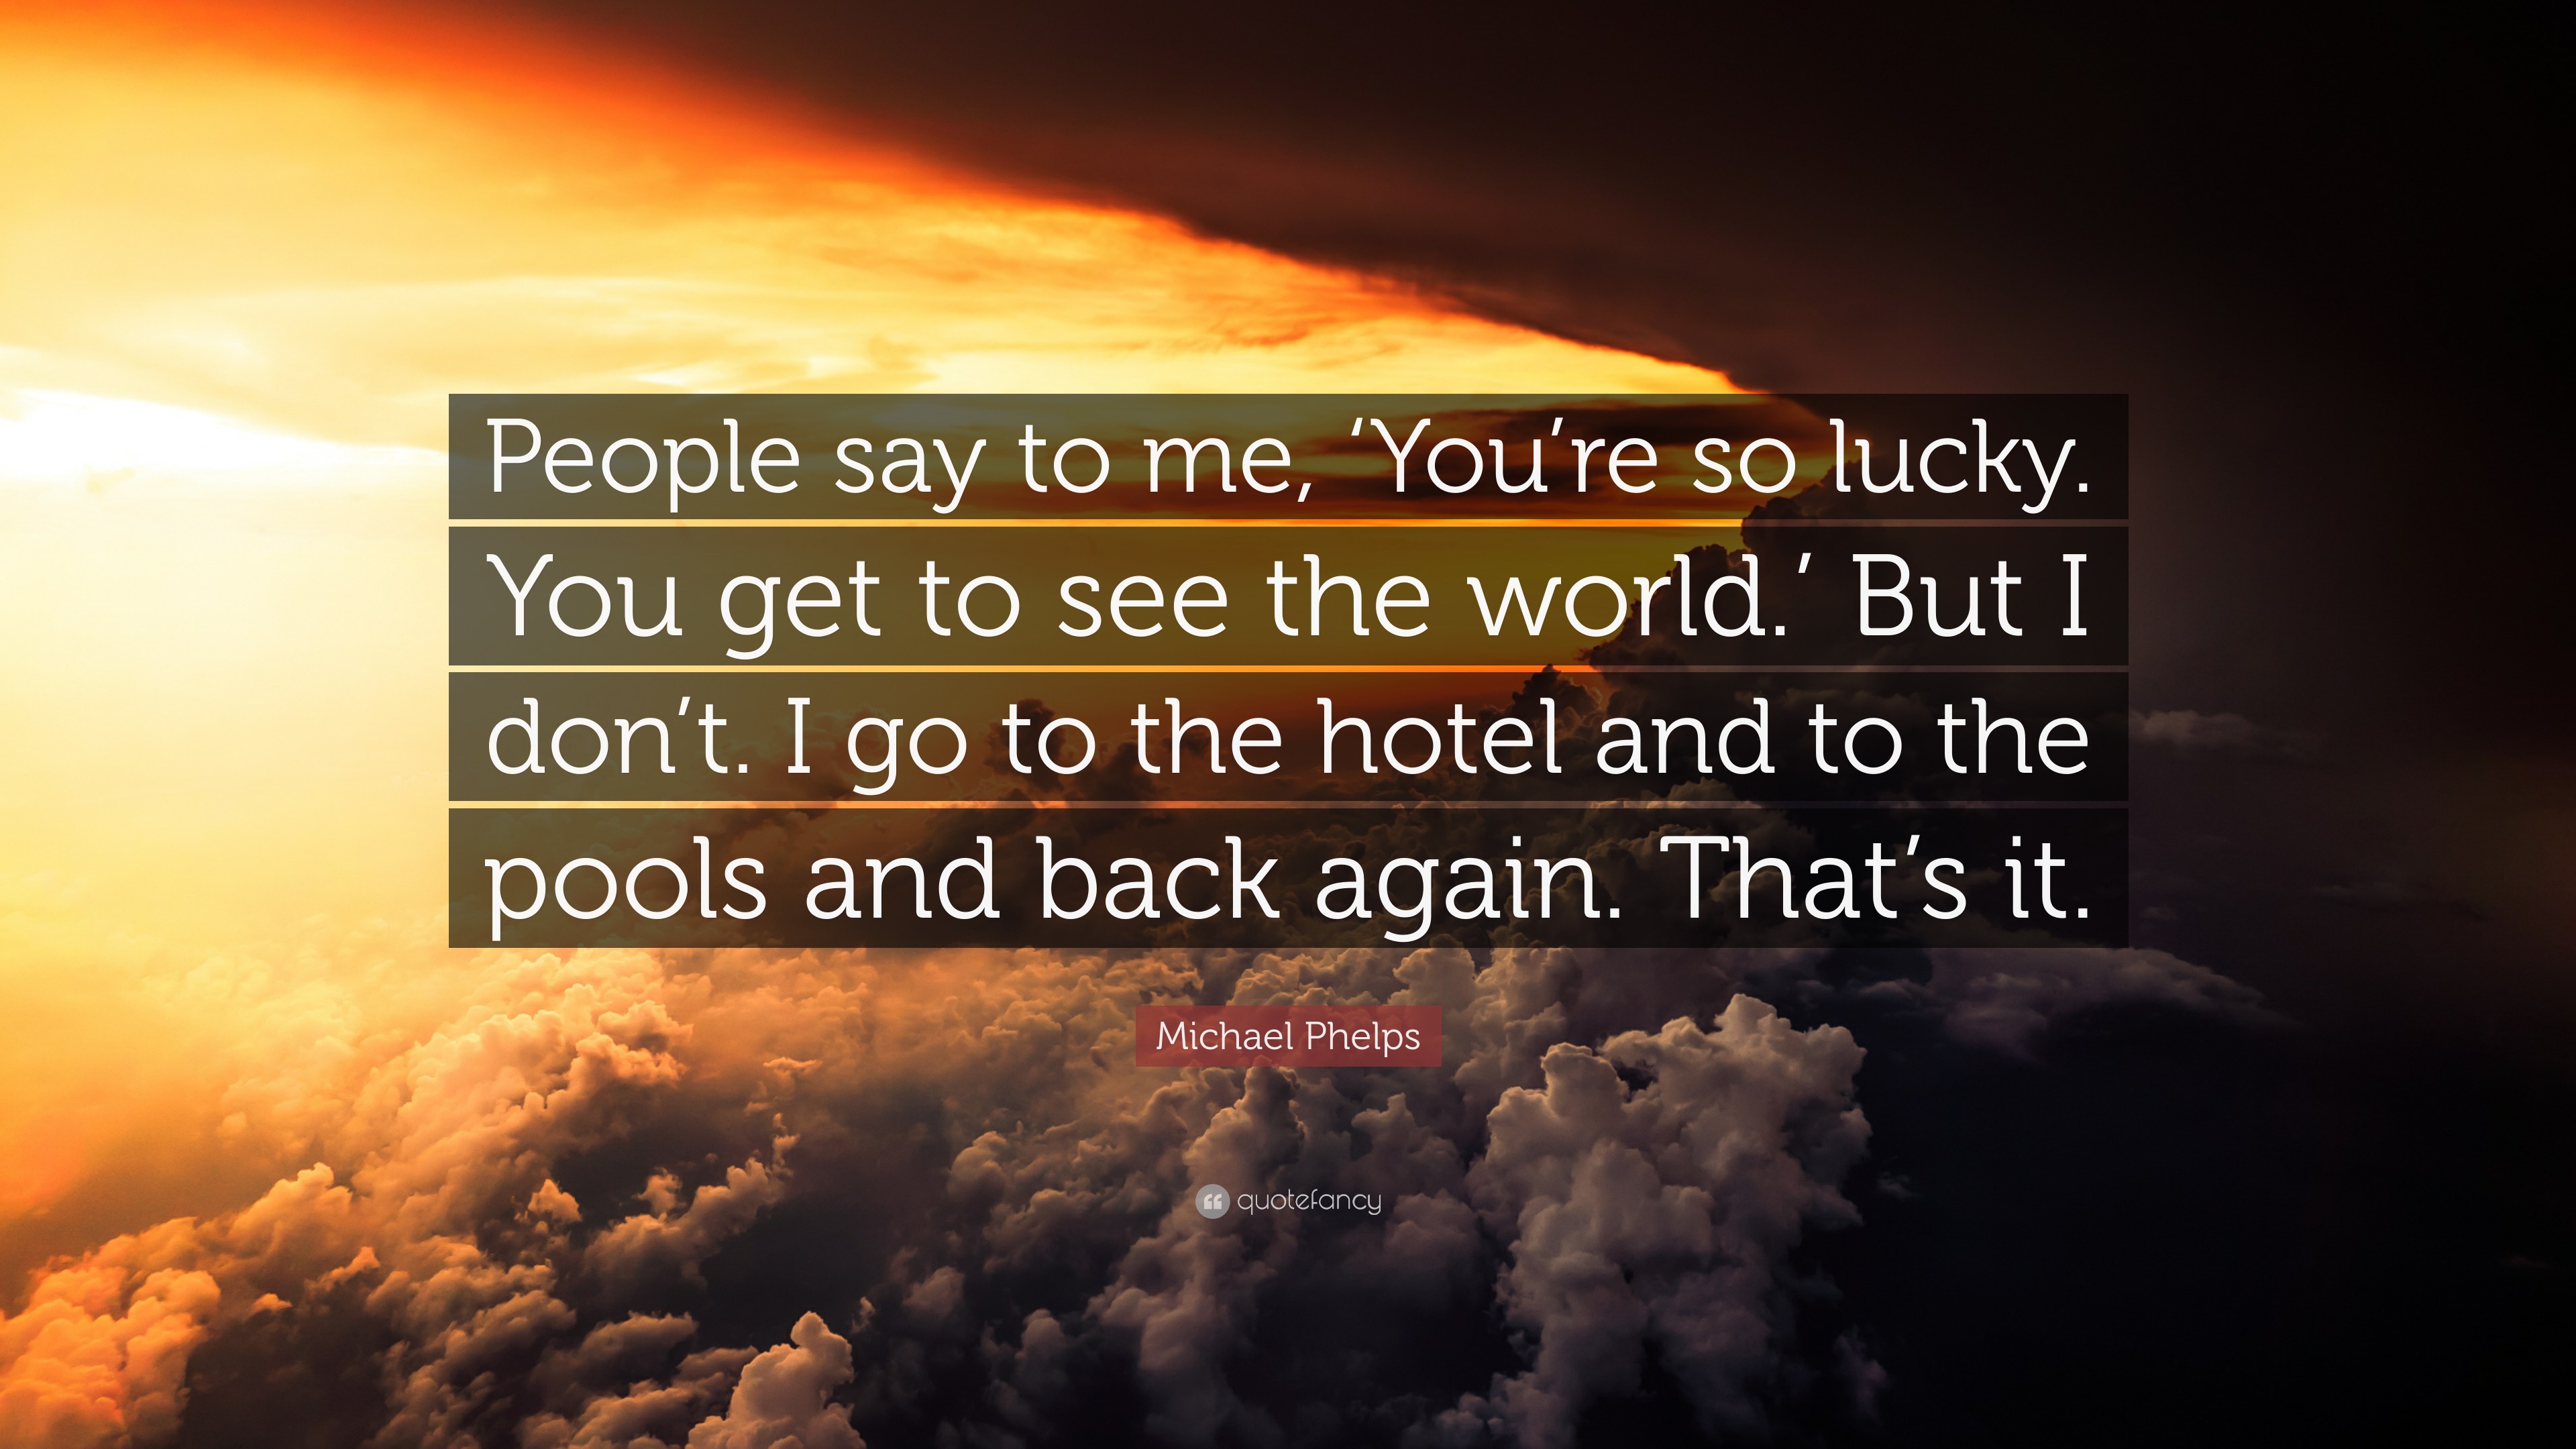 Michael Phelps Quote: “People say to me, 'You're so lucky. You get to see  the world.' But I don't. I go to the hotel and to the pools and back ...”